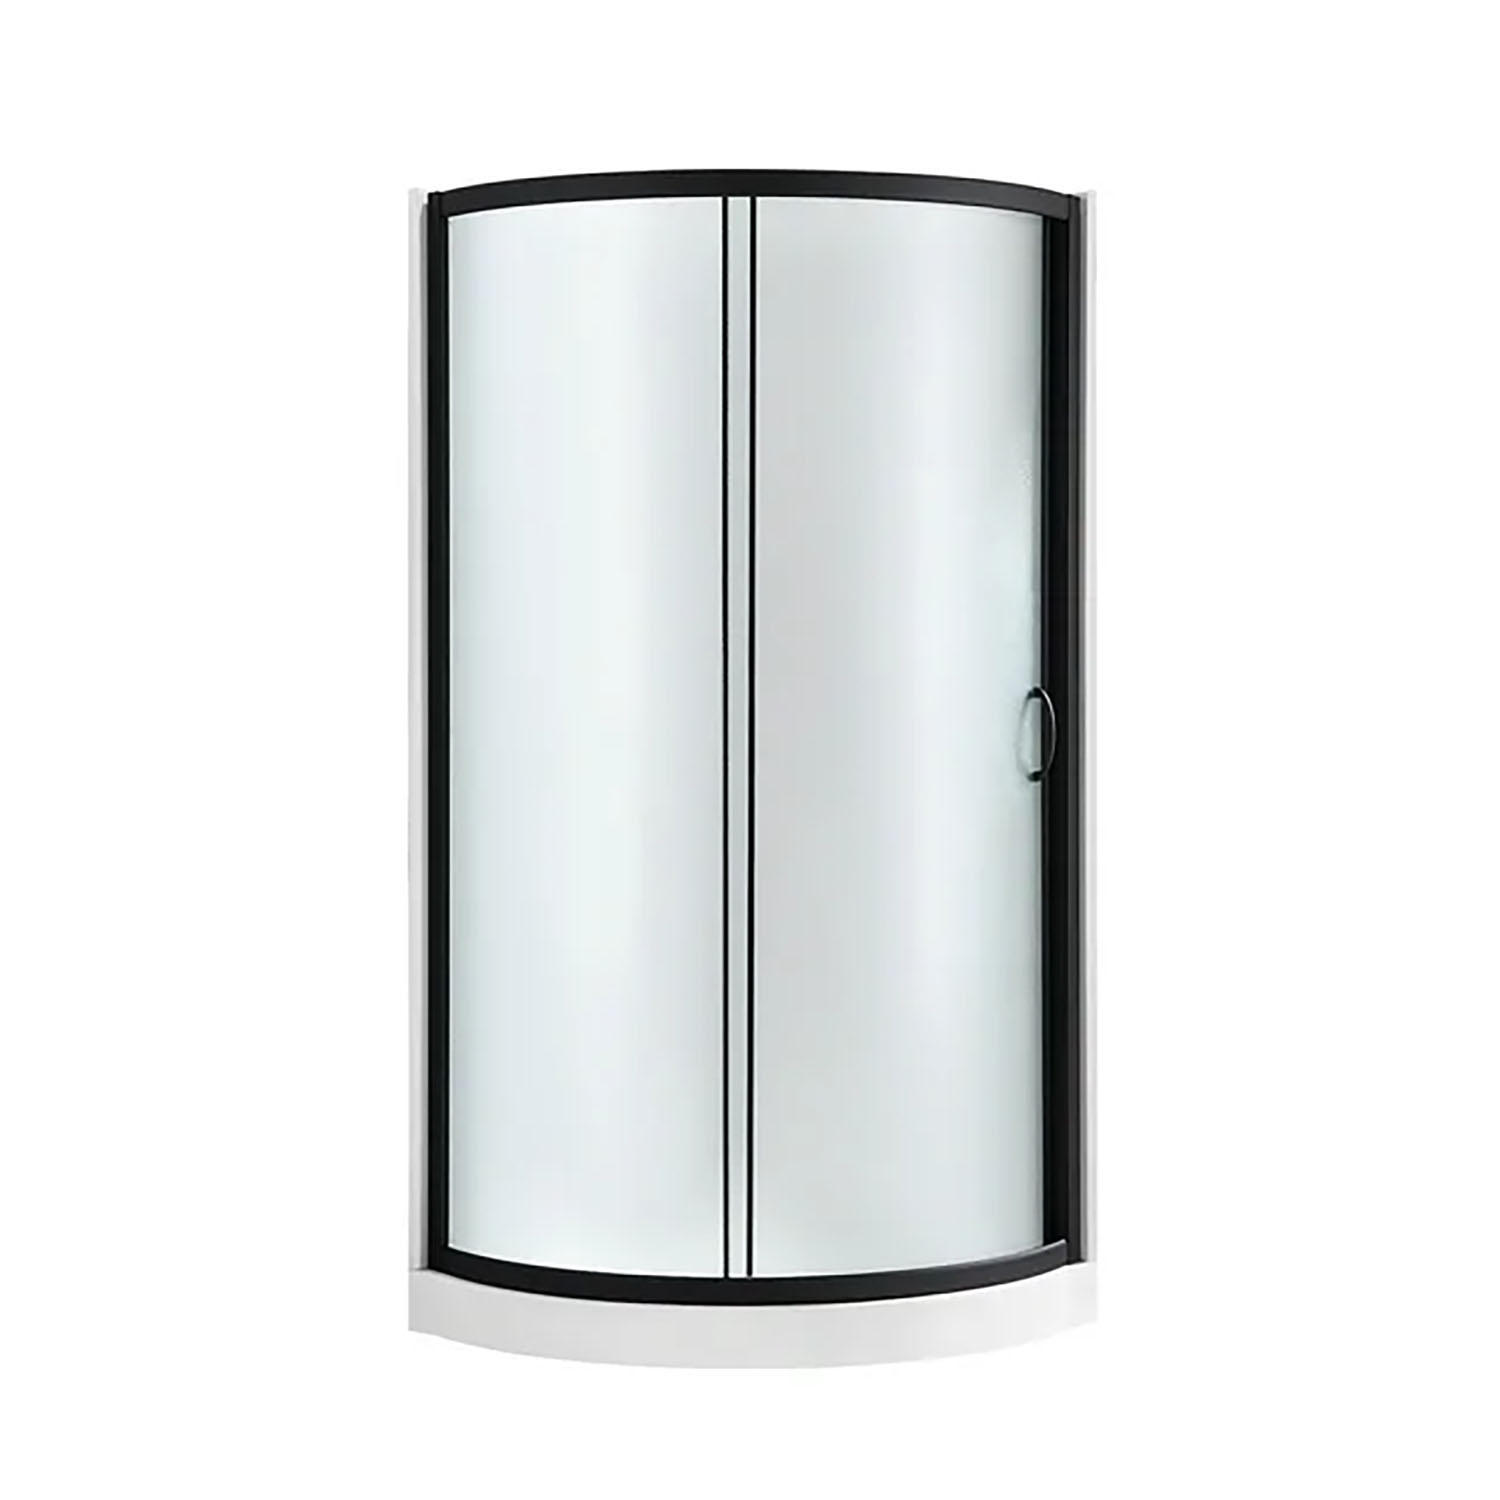 OVE Decors Breeze 34 in x 34 in x 77 in H Curved Corner Shower Kit with Frosted Glass, Walls, Base and Hardware - Matte